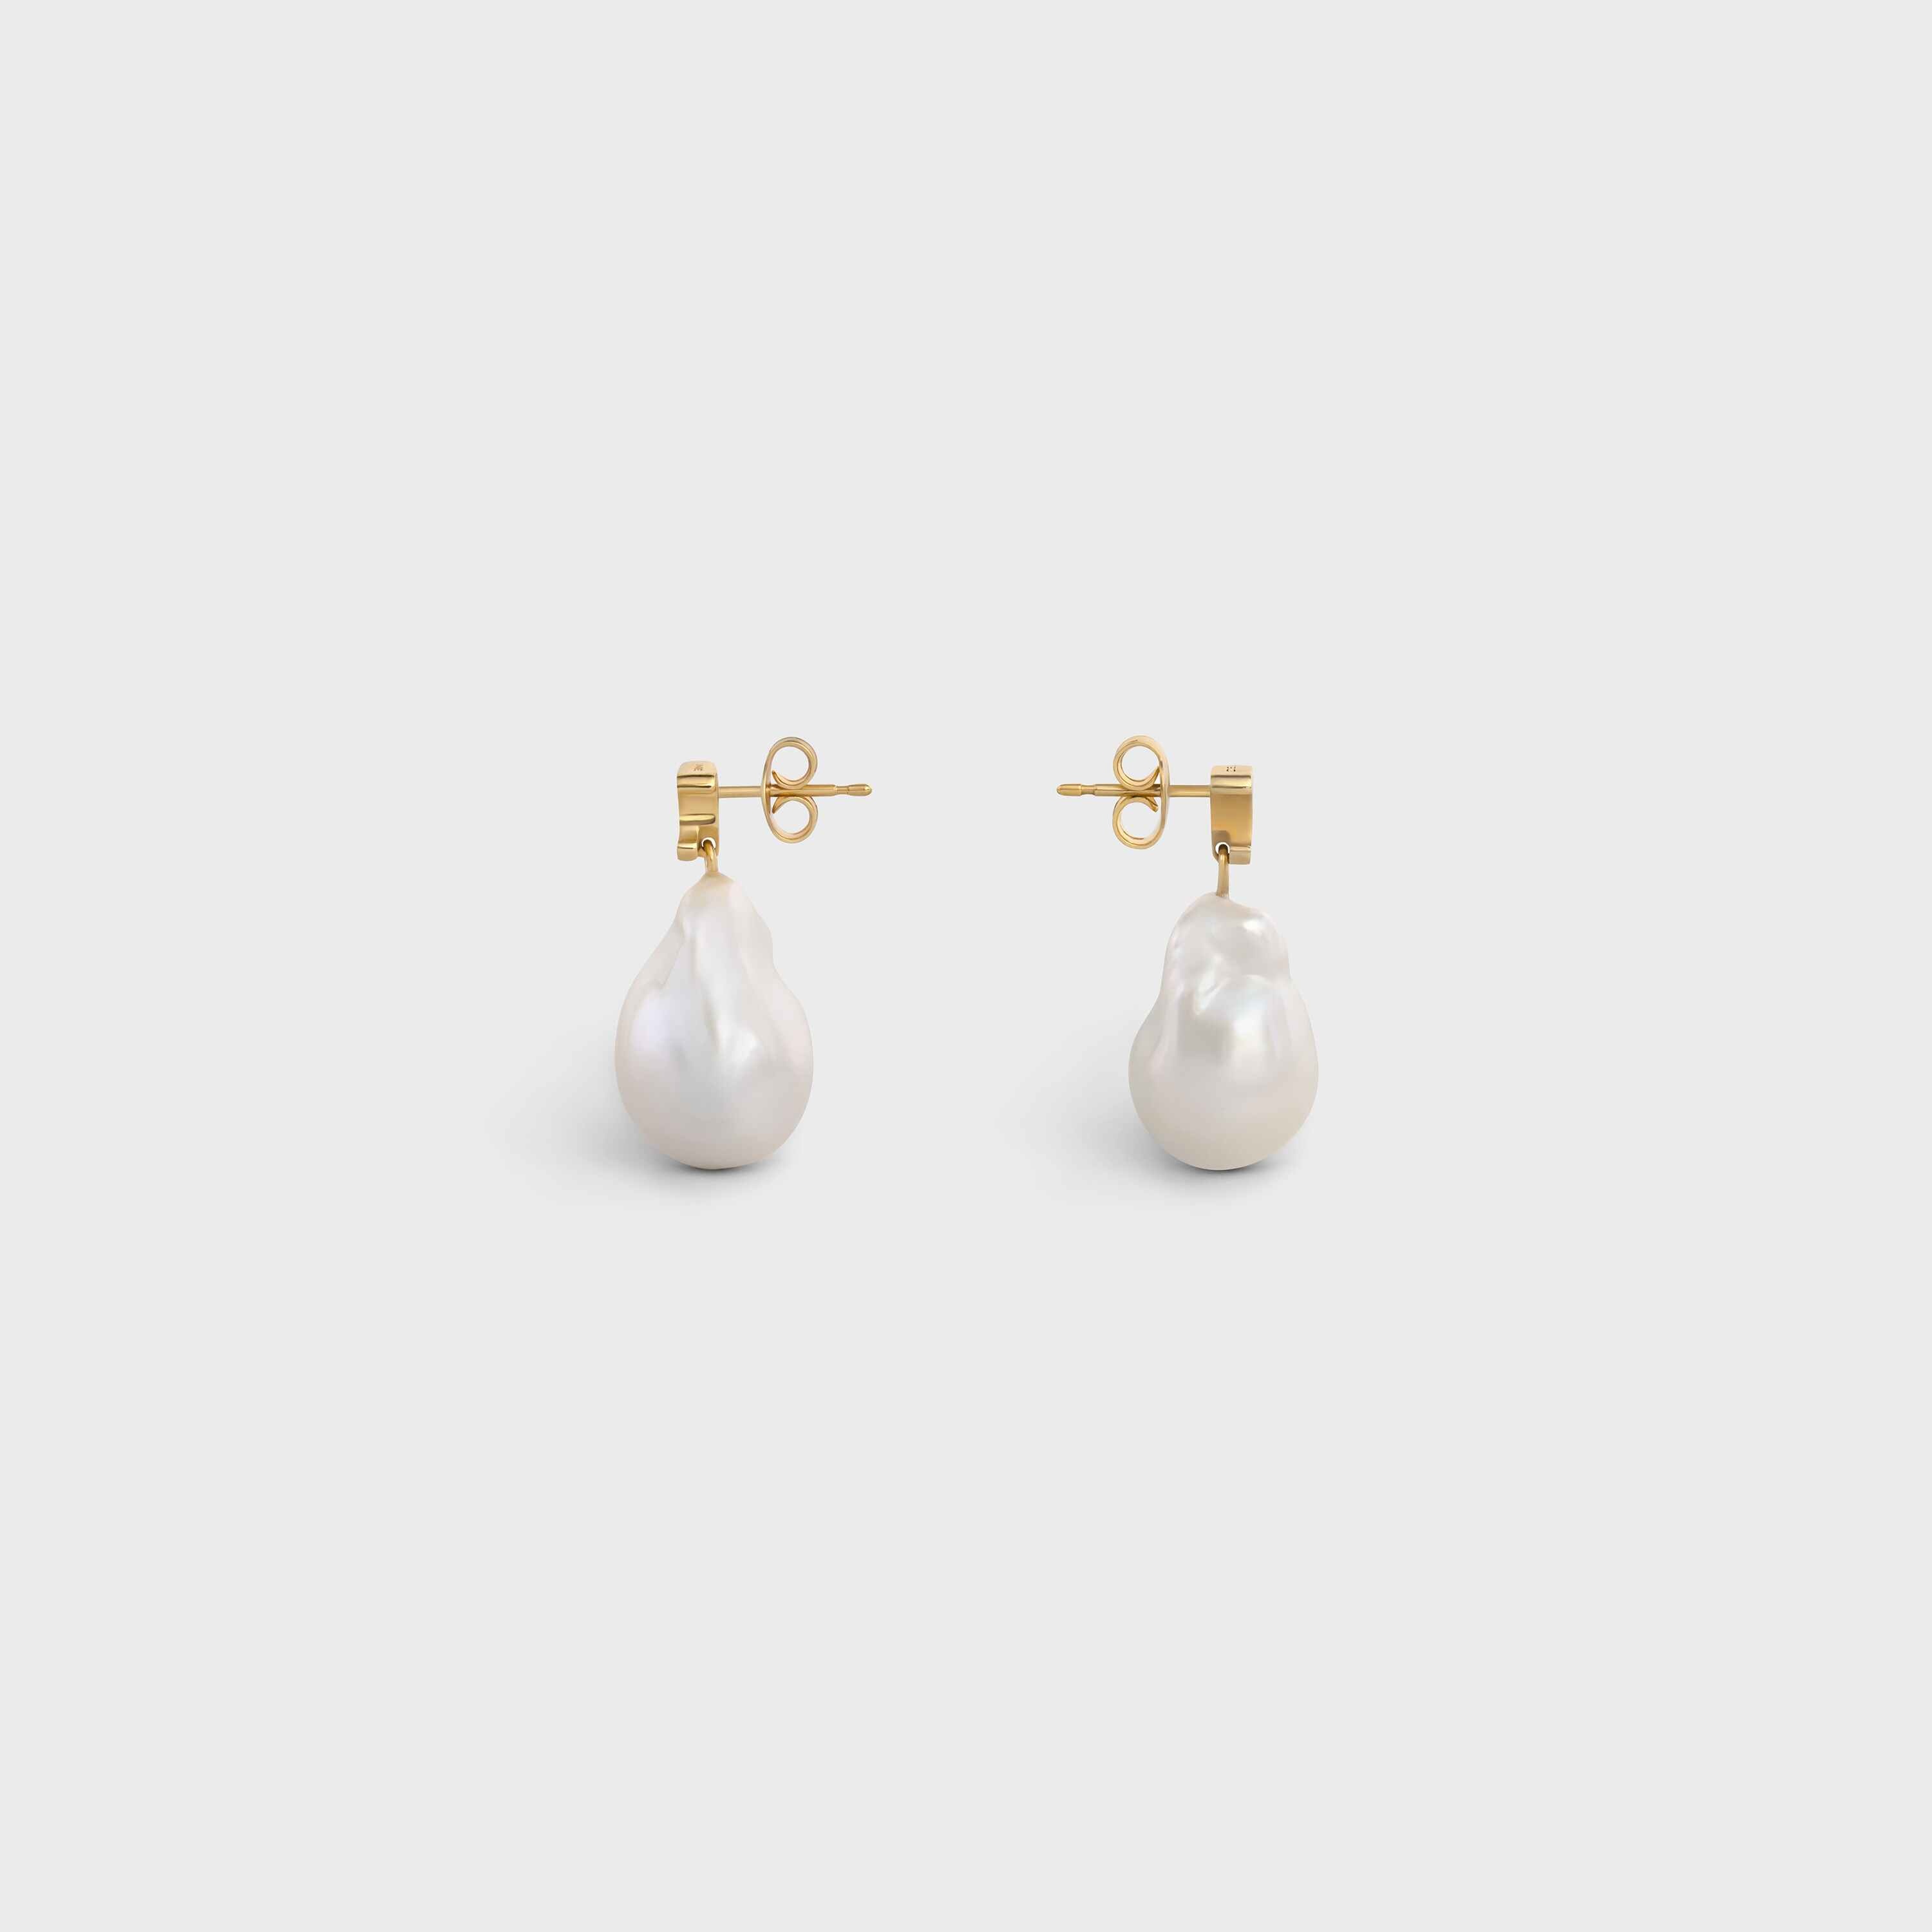 Baroque Triomphe Earrings in Brass with Gold Finish and Cultured Pearls - 3